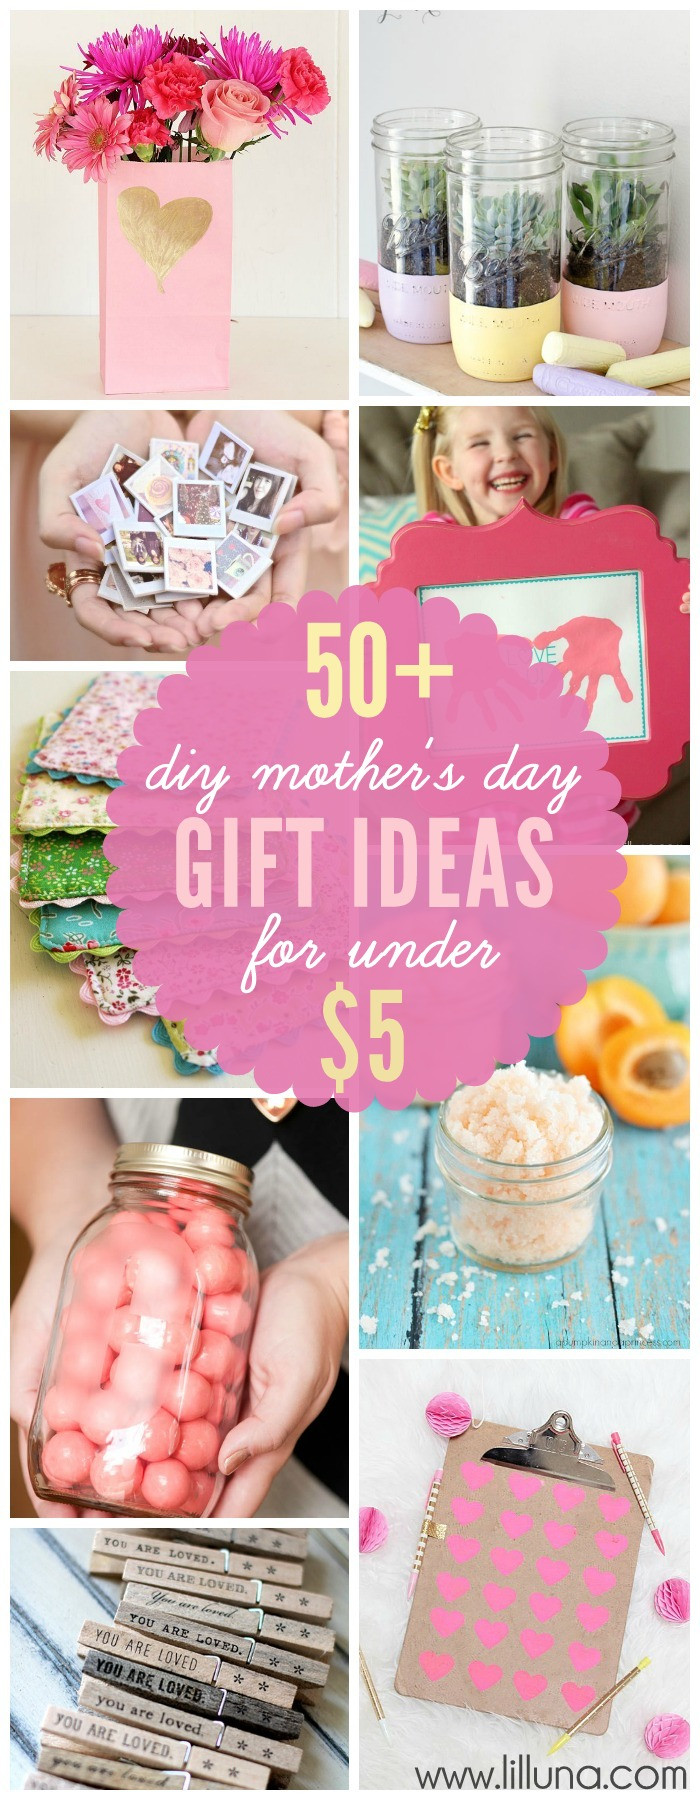 Ideas For Mothers Day Gift
 Inexpensive DIY Mother s Day Gift Ideas